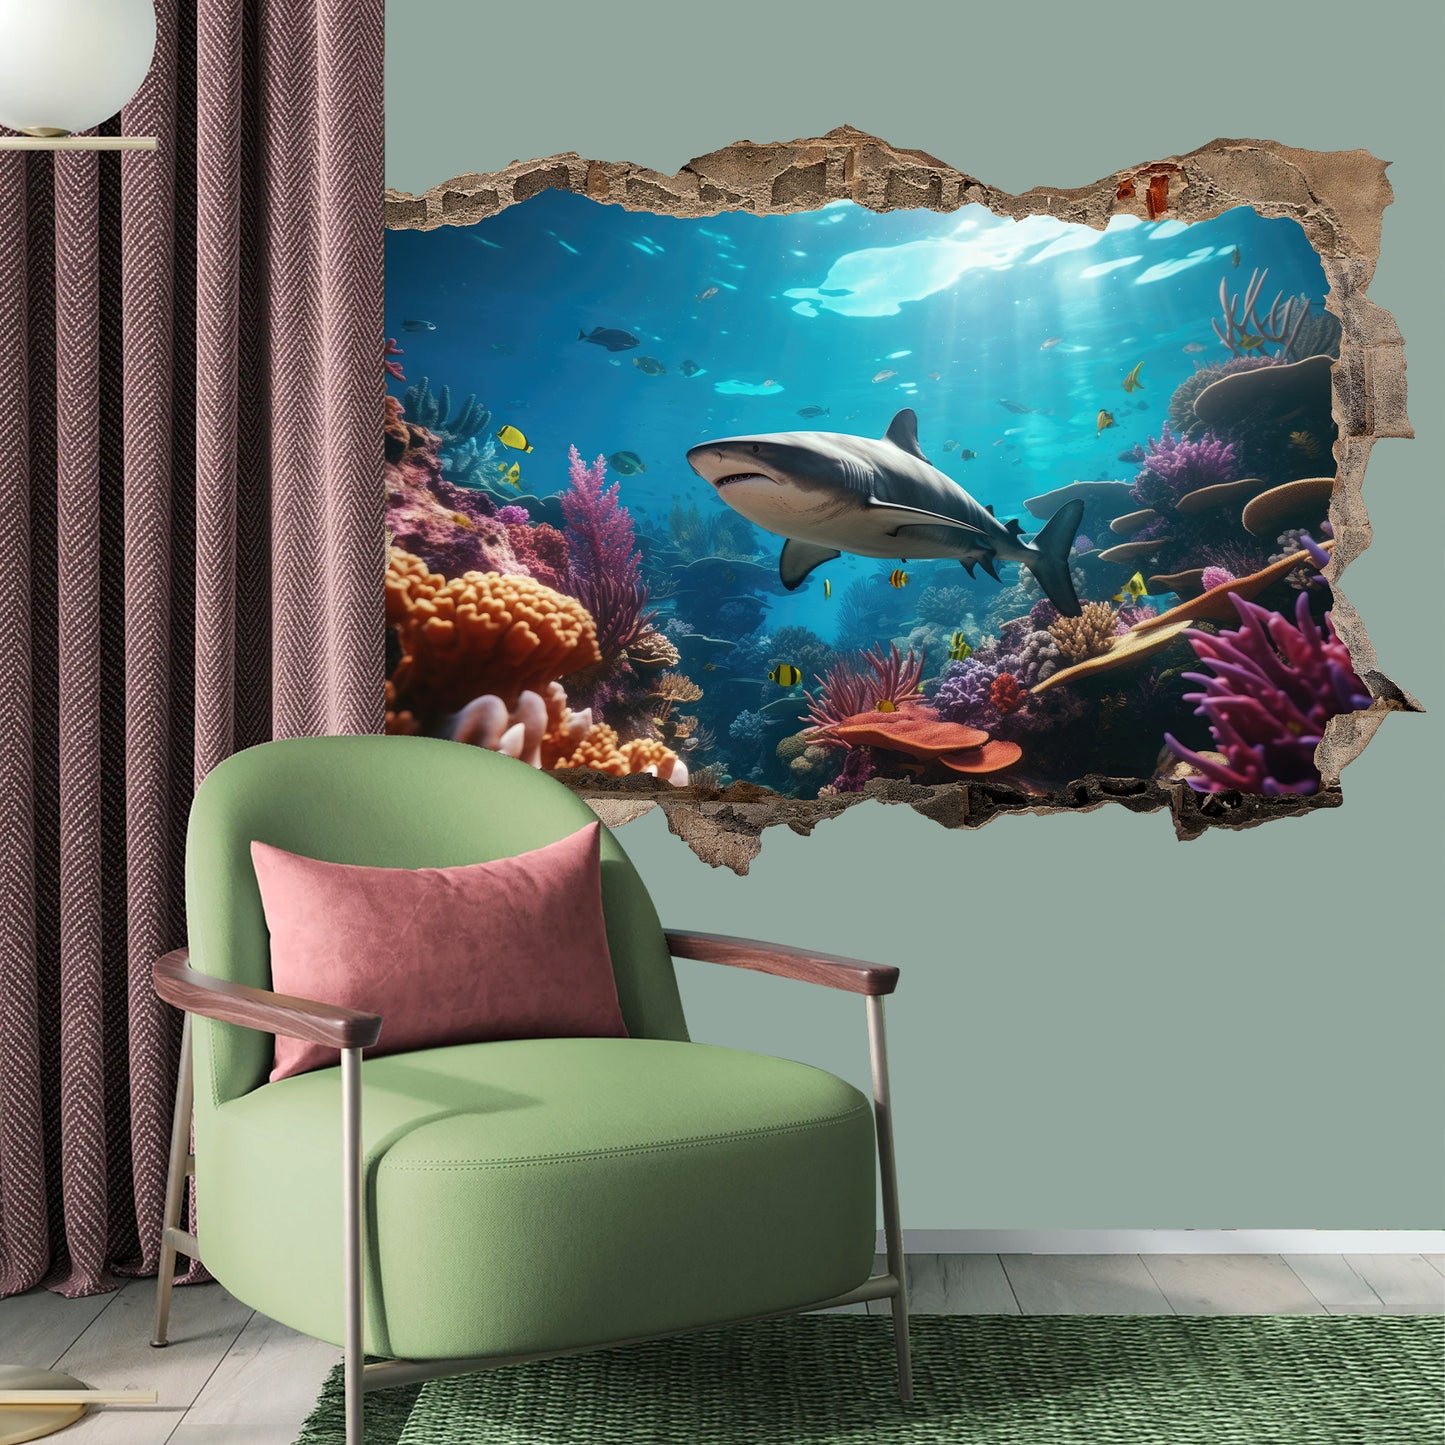 3D Underwater World Wall Decal - Sharks, Colorful Coral Reef, Marine Life, Room Decor - BW016